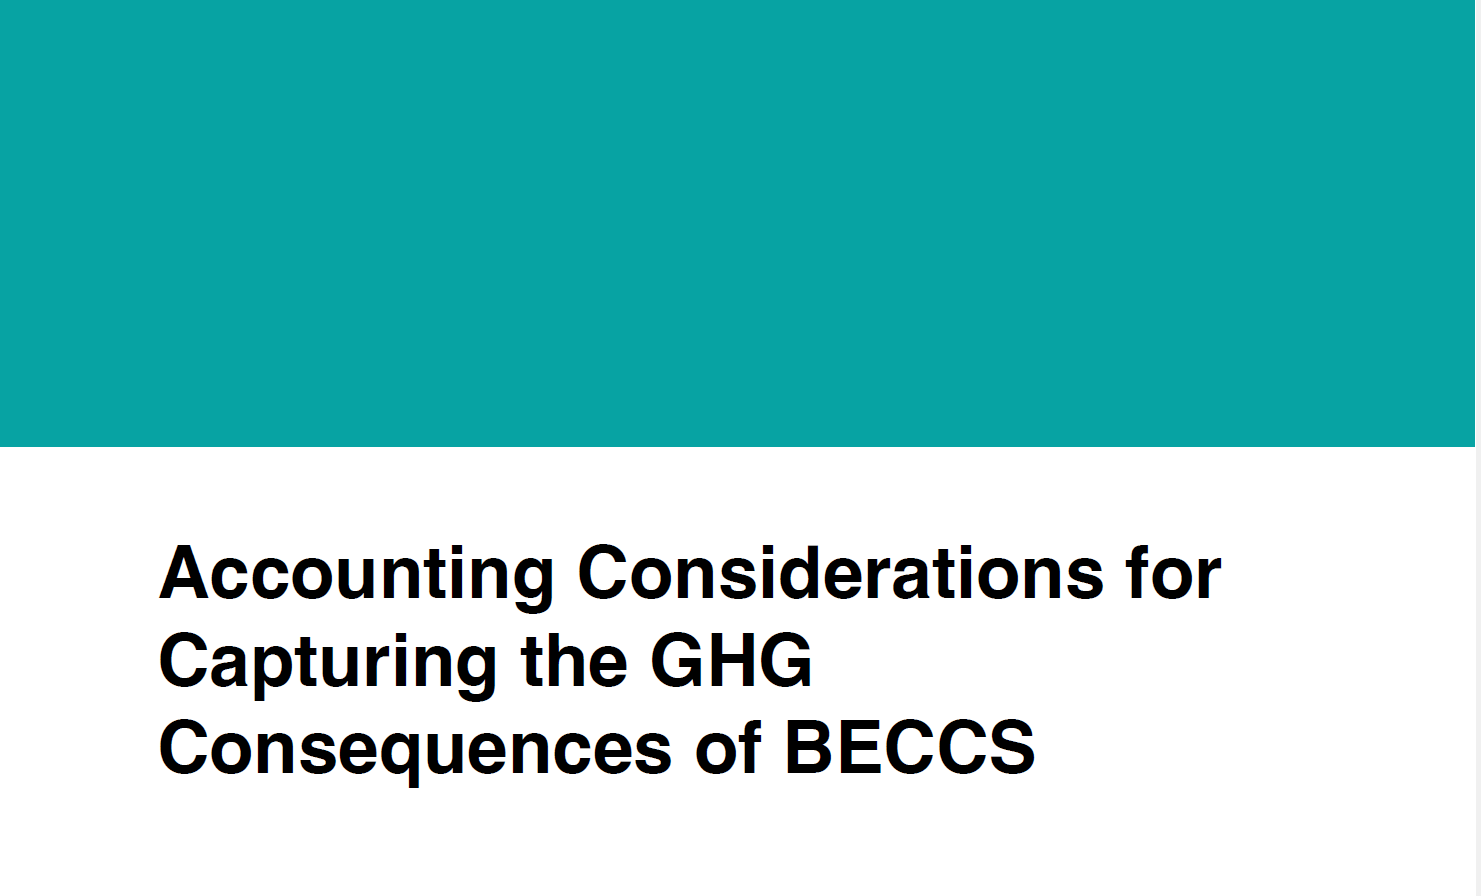 Accounting Considerations for Capturing the GHG Consequences of BECCS